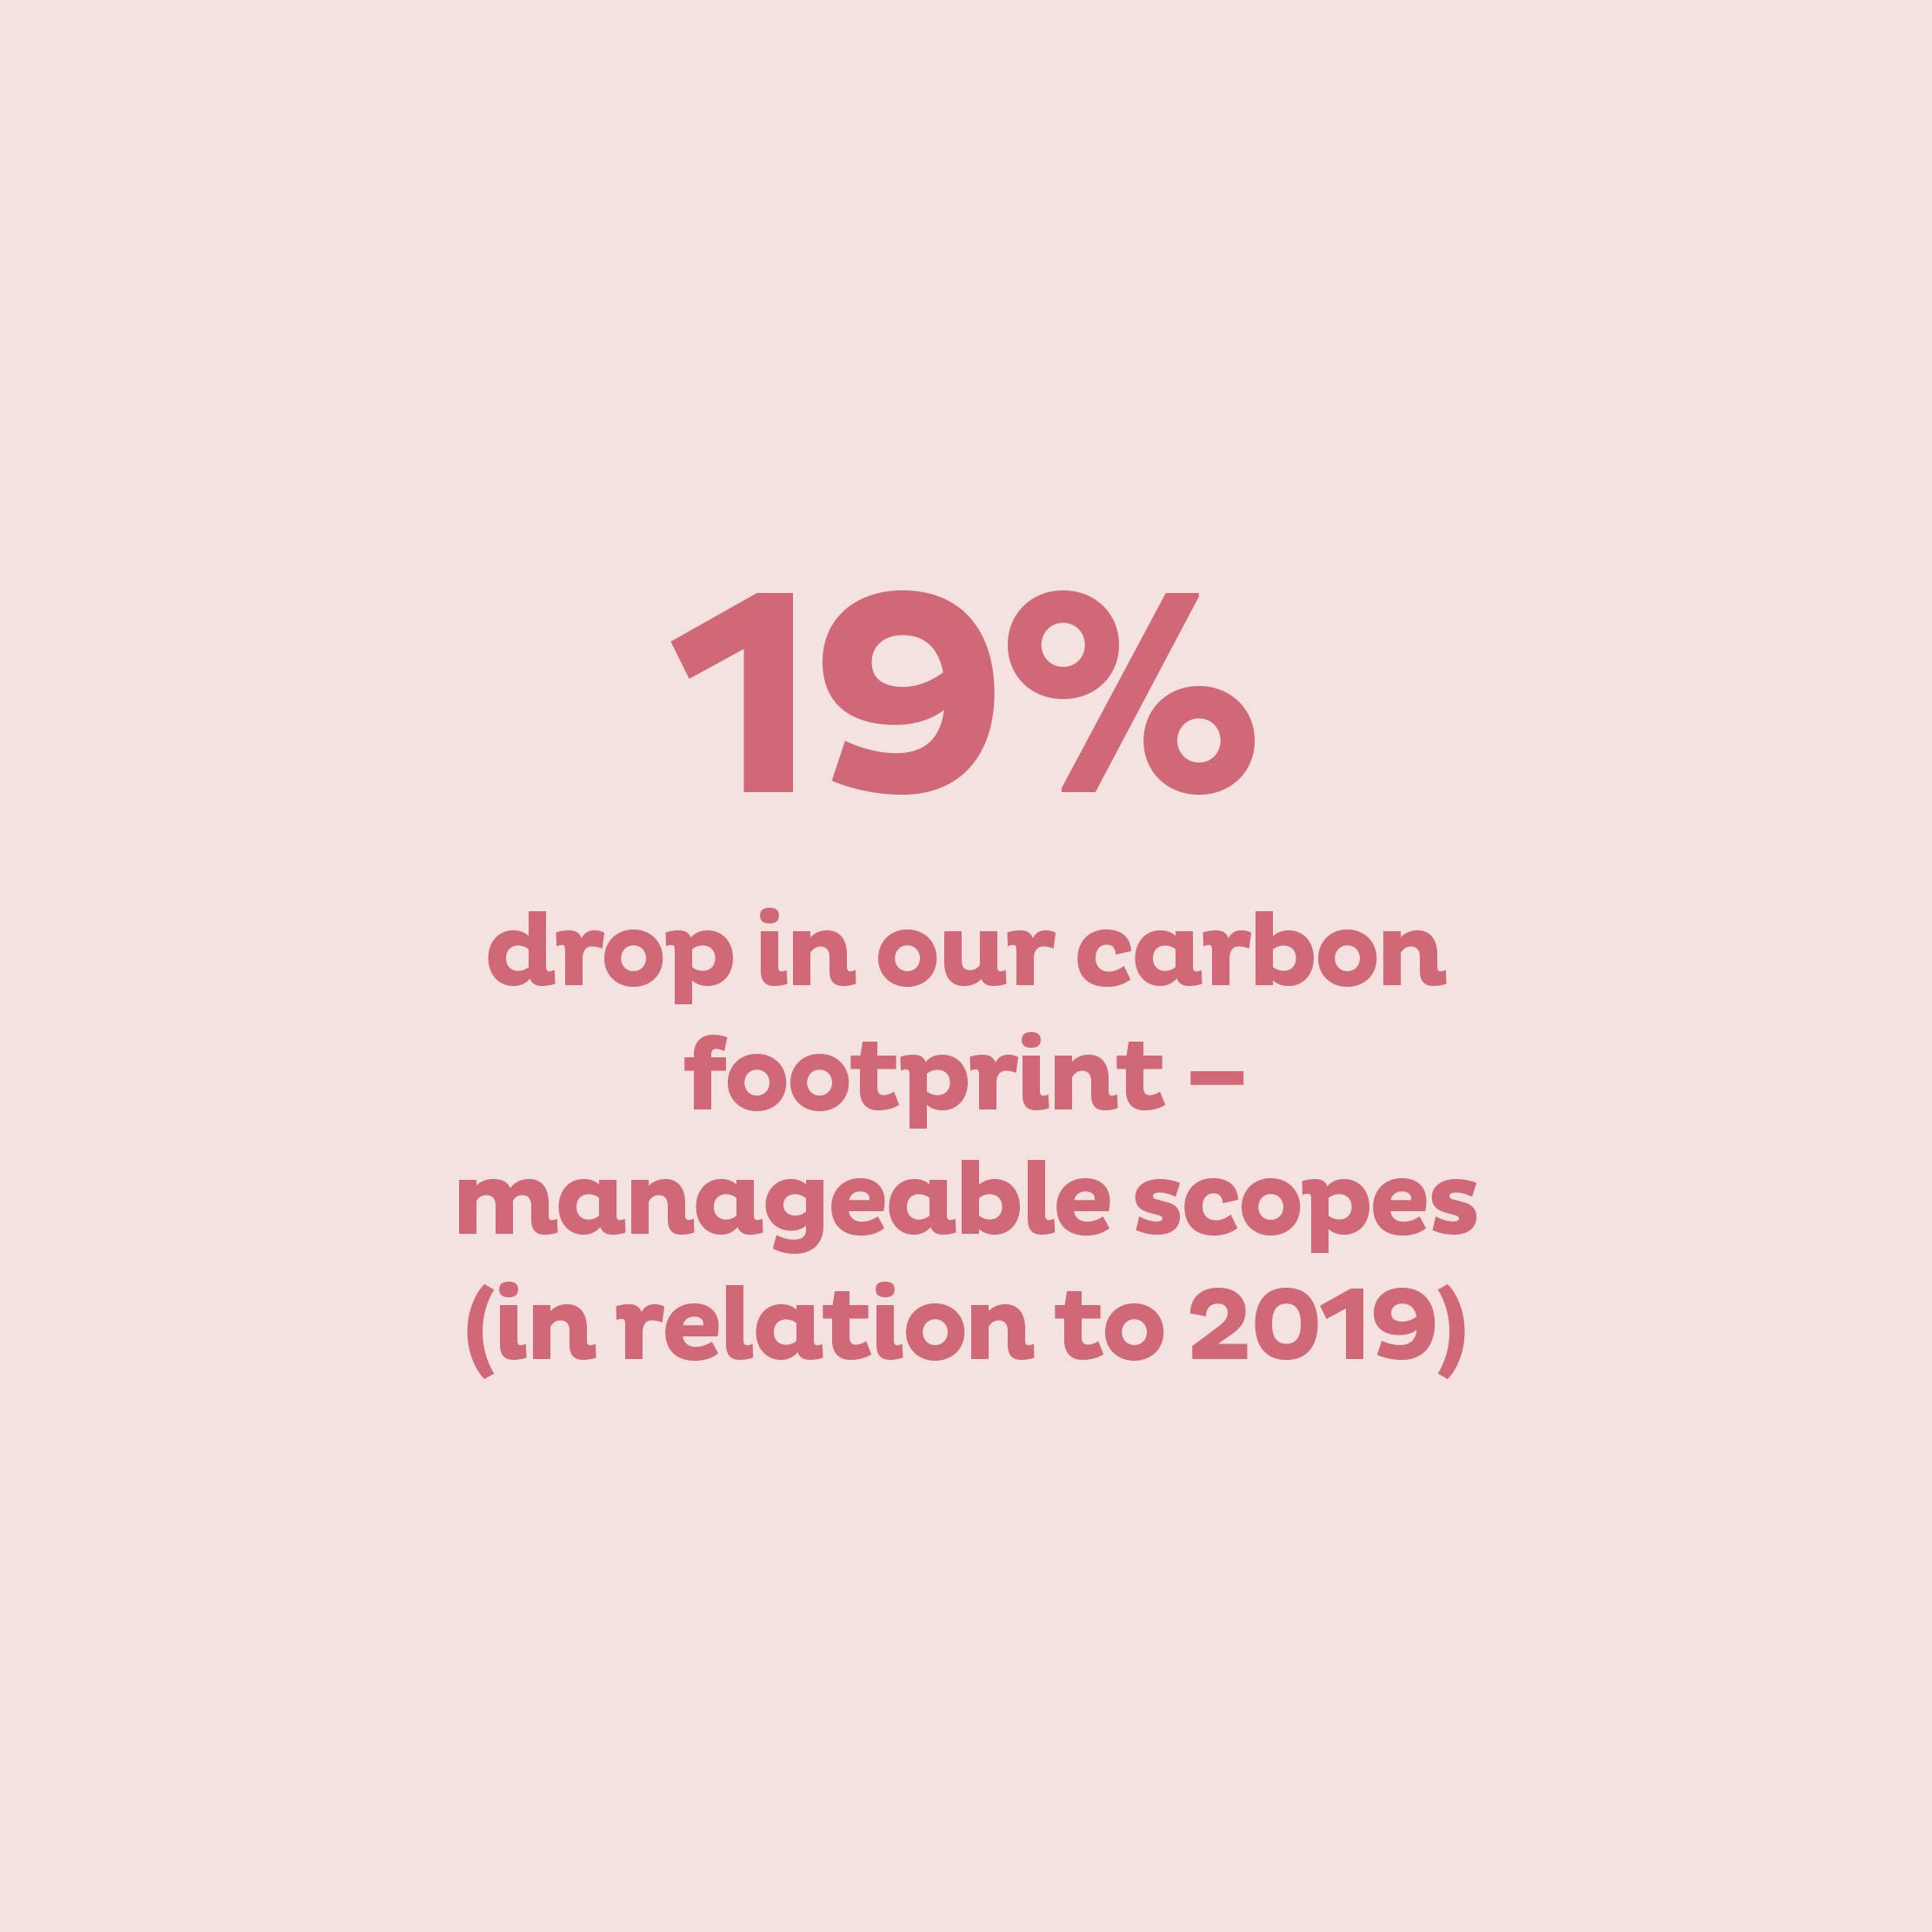 19% drop in our carbon footprint – manageable scopes (in relation to 2019)